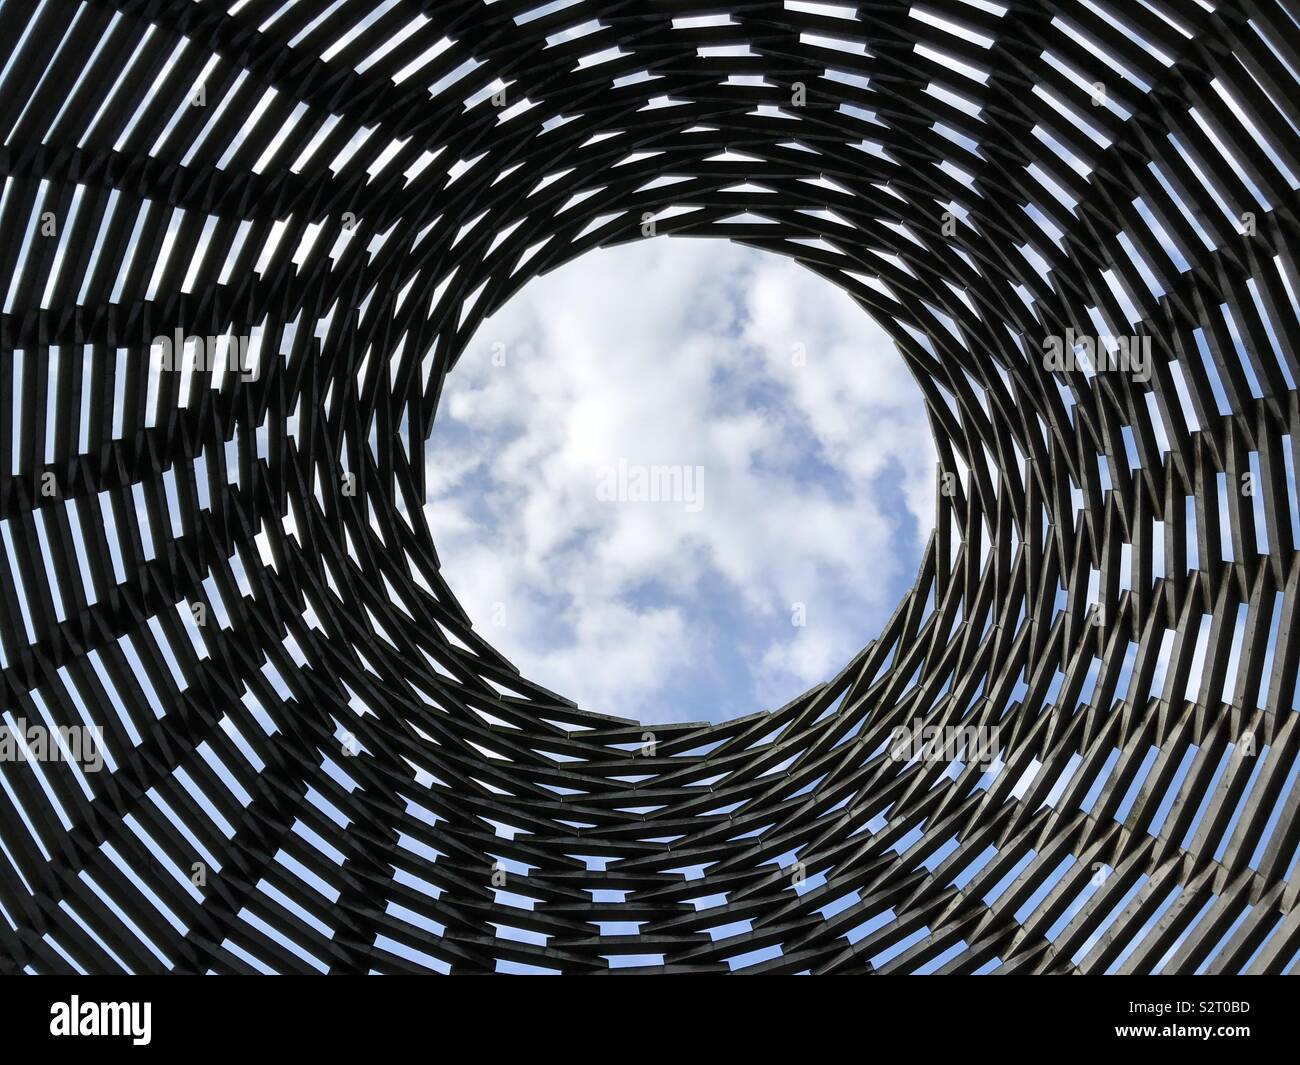 Opening in a wooden structure towards the sky Stock Photo